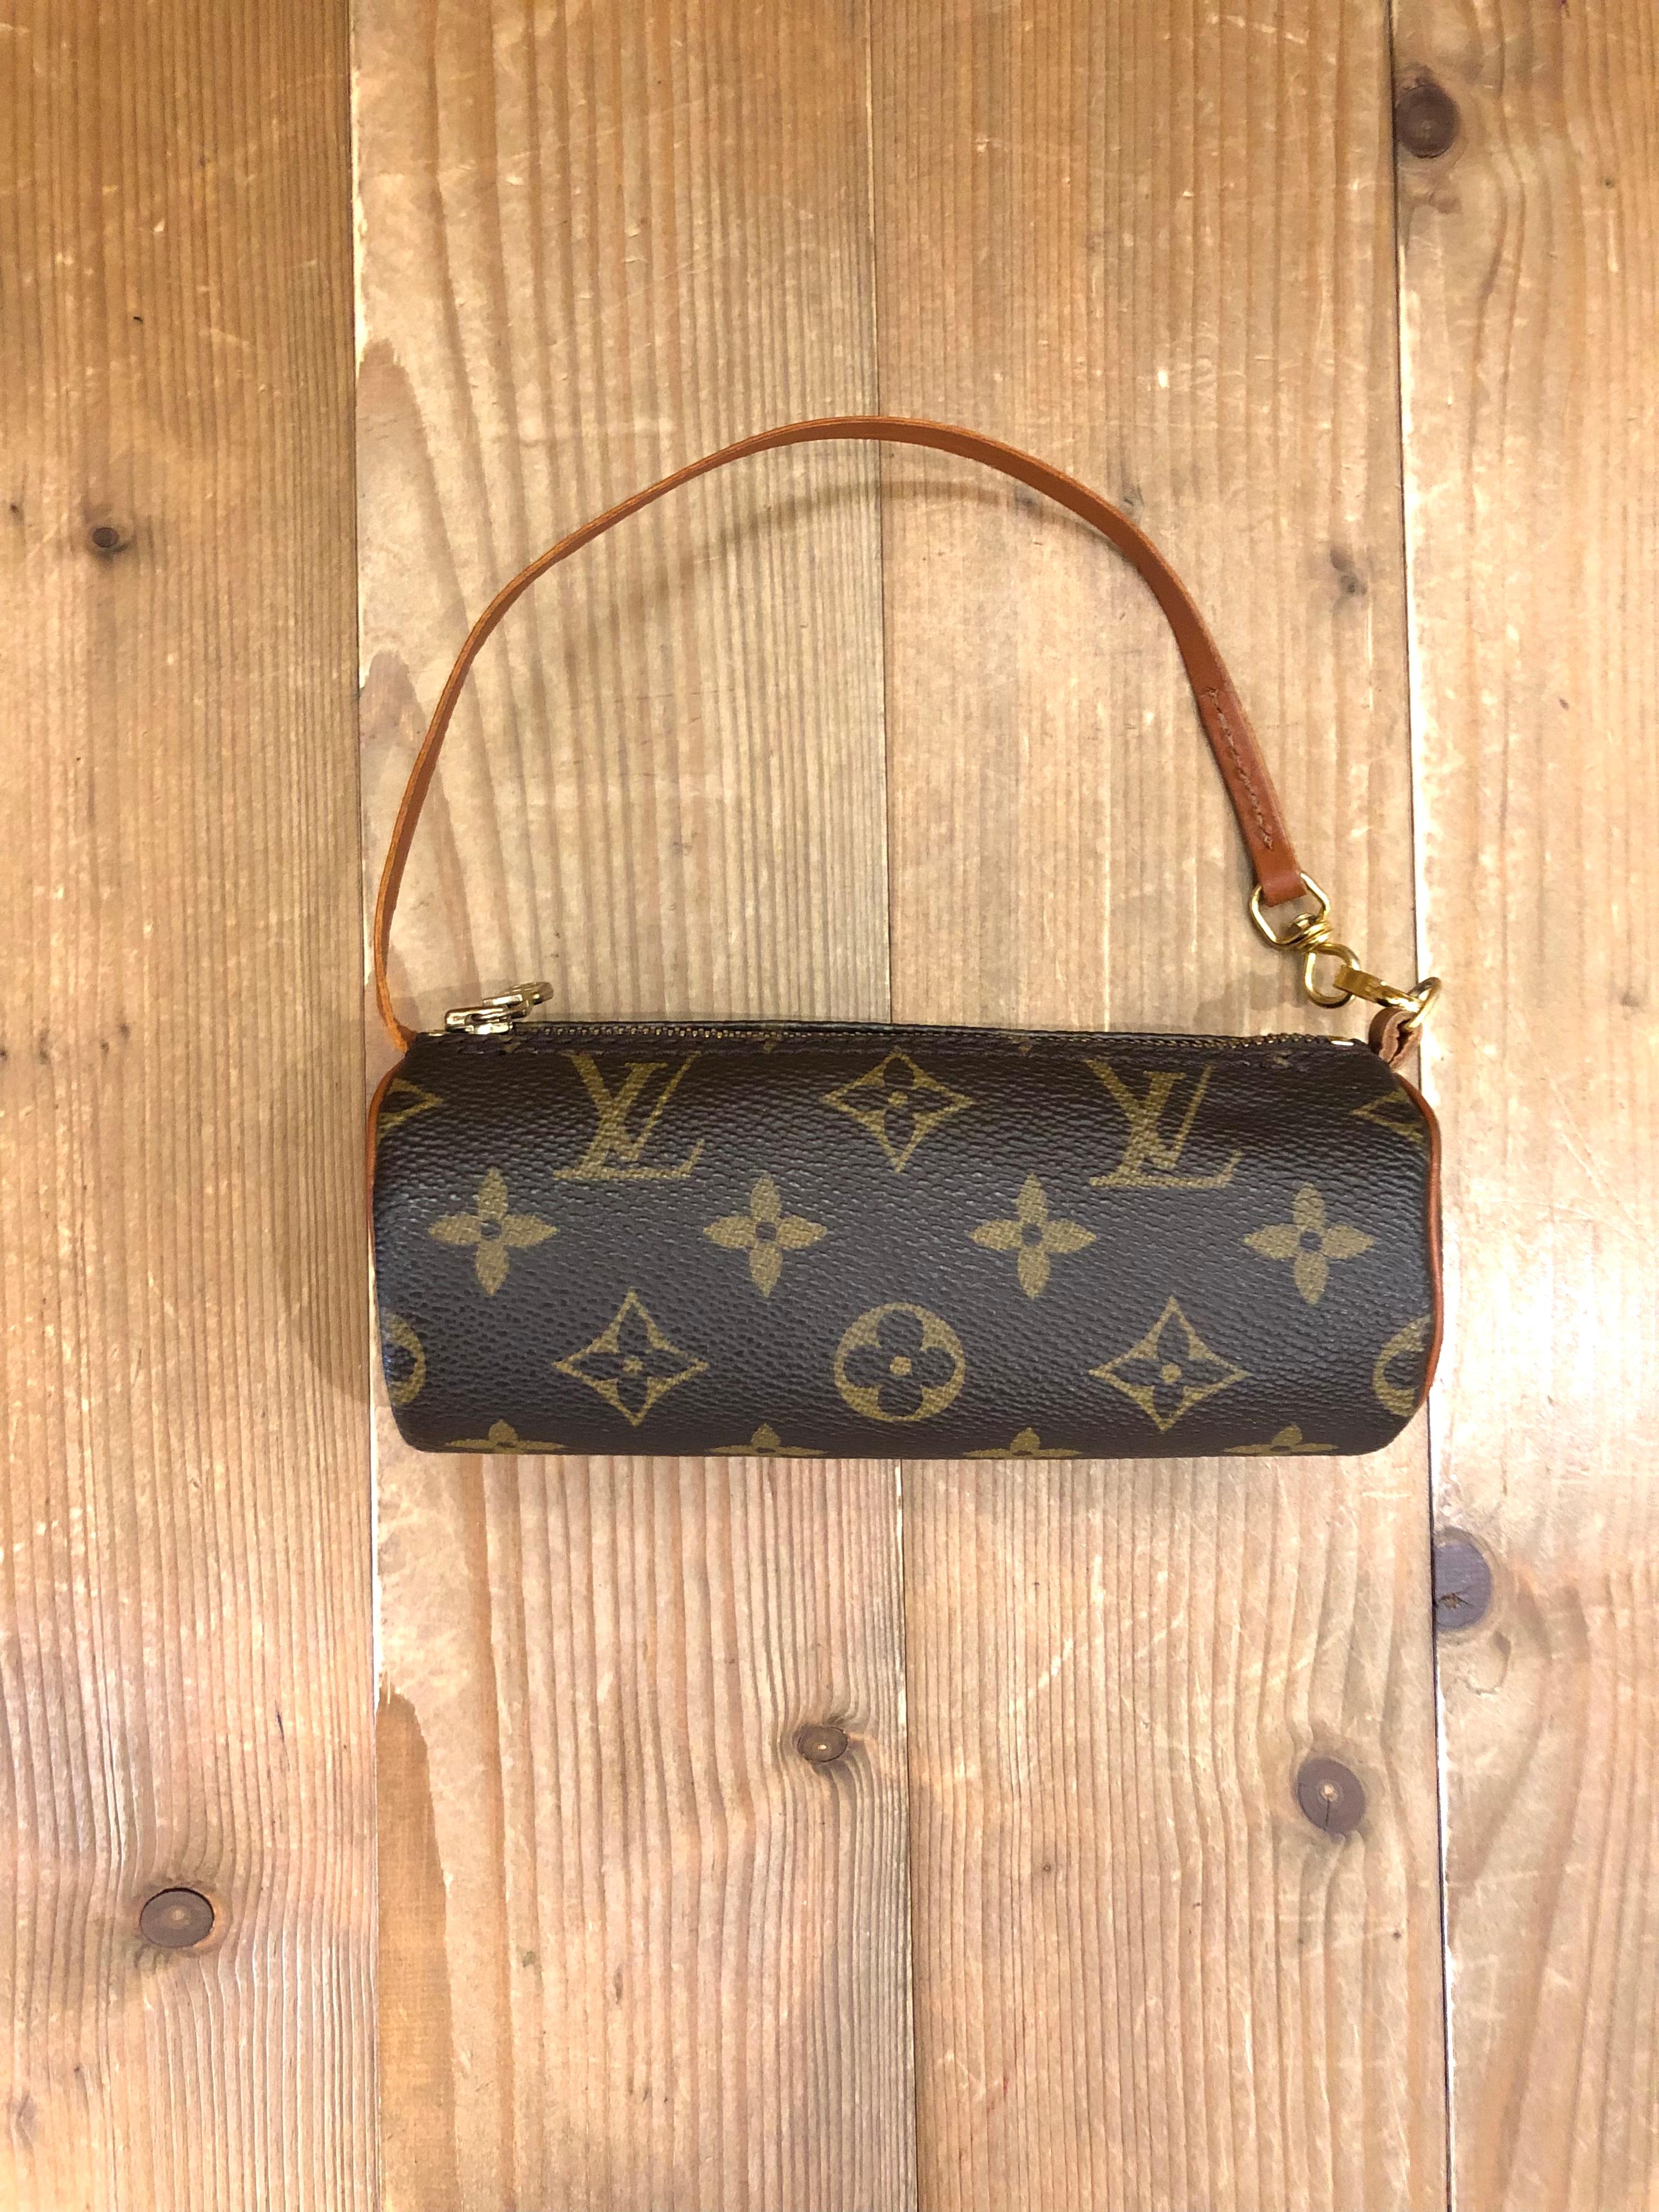 1990s Vintage LOUIS VUITTON mini Papillon pouch in brown monogram canvas and leather. Measures 6.25”x 2.25”x 2.25”. Comes with complimentary non-LV chain.

Condition - Minor signs of wear. Generally in very good condition.